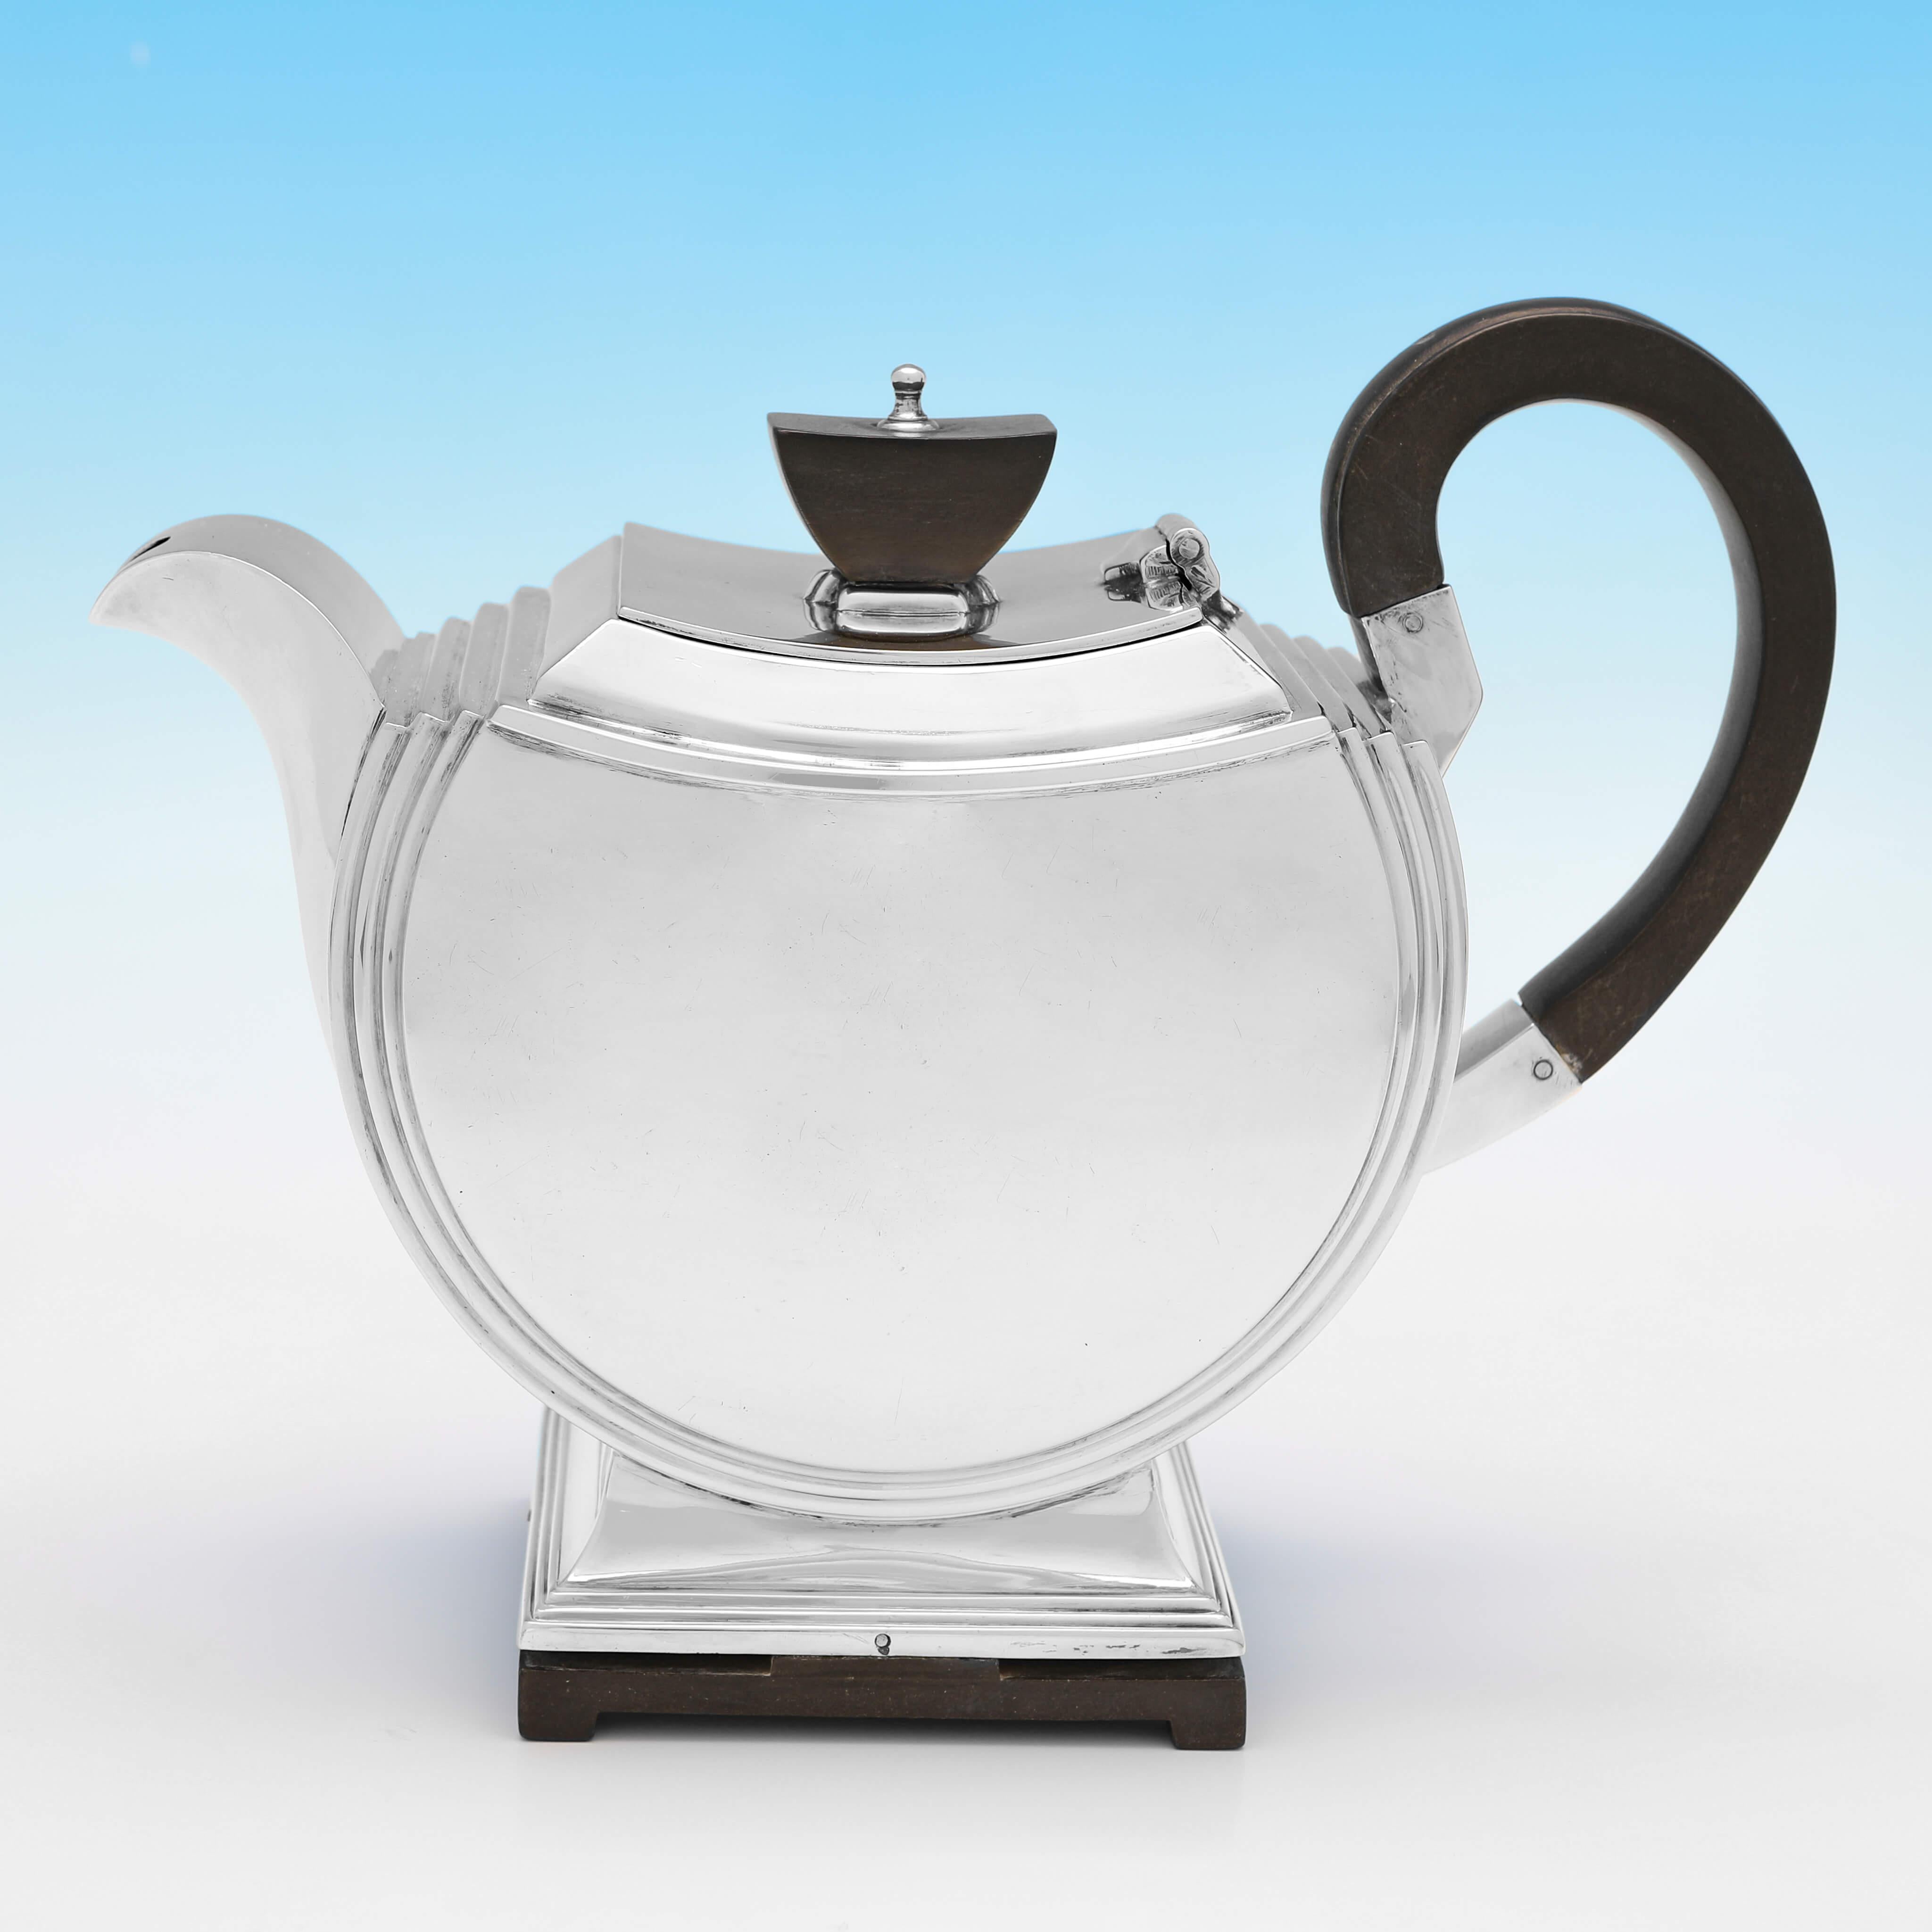 Hallmarked in London in 1947 by Walker & Hall, this fantastic, Sterling Silver Tea Set, is the height of Art Deco design, with a wooden base, handle and finial to the teapot. 

The teapot measures 5